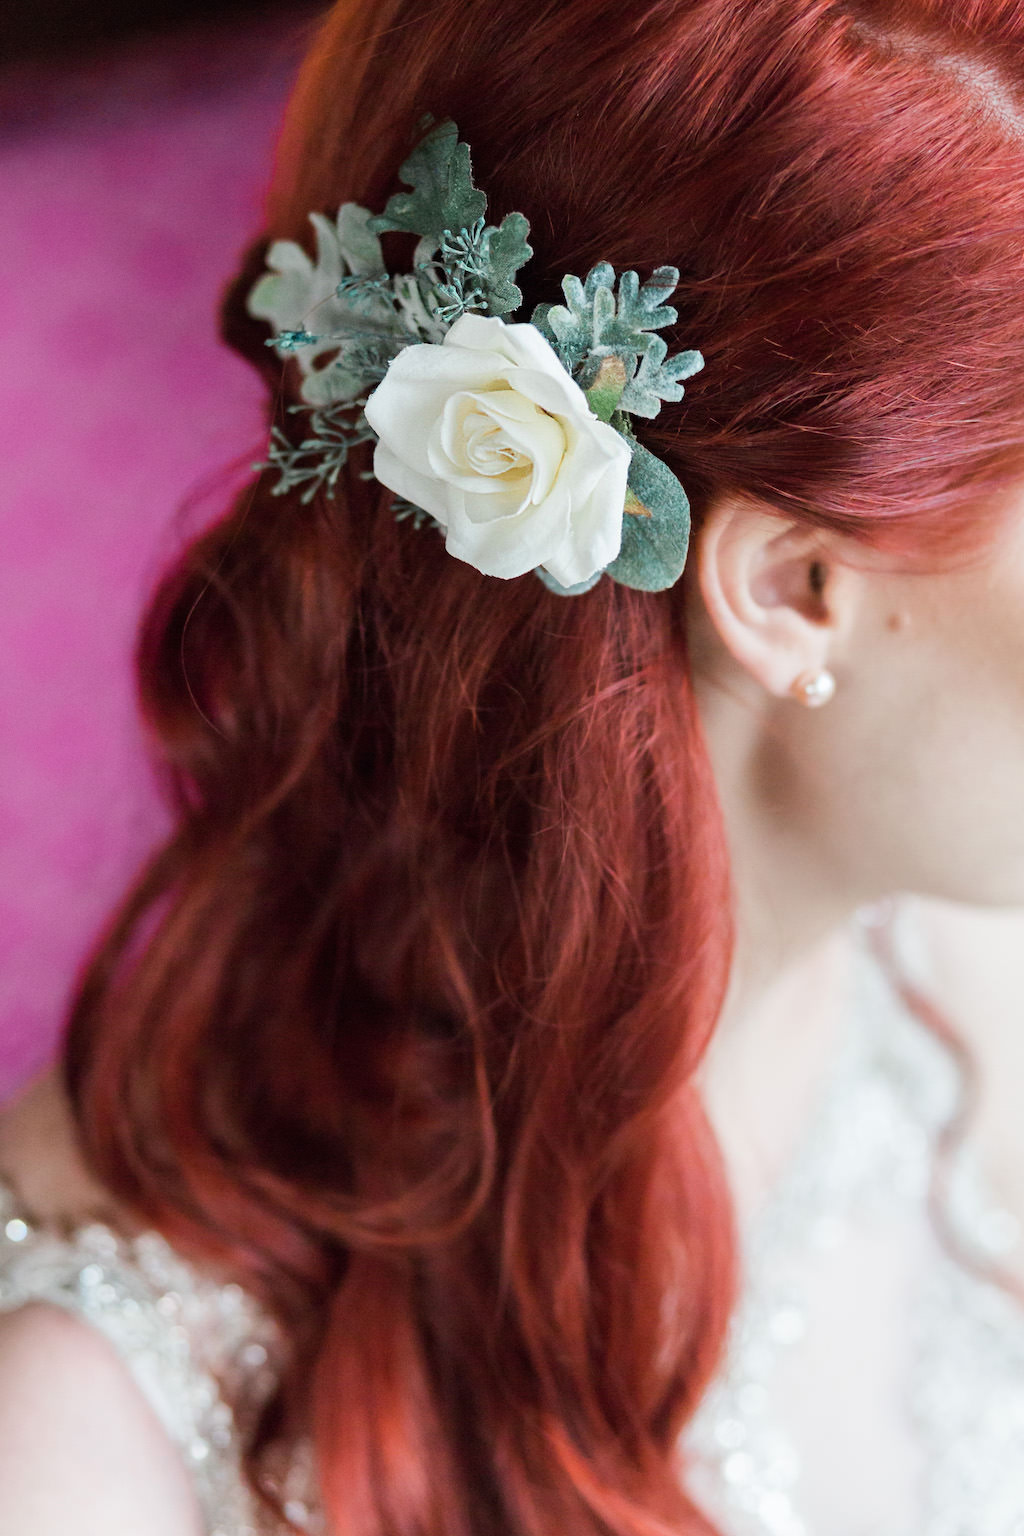 Red Haired Bride Getting Ready Portrait with White Floral and Greenery Hair Accessory | St. Pete Wedding Florist Cotton and Magnolia